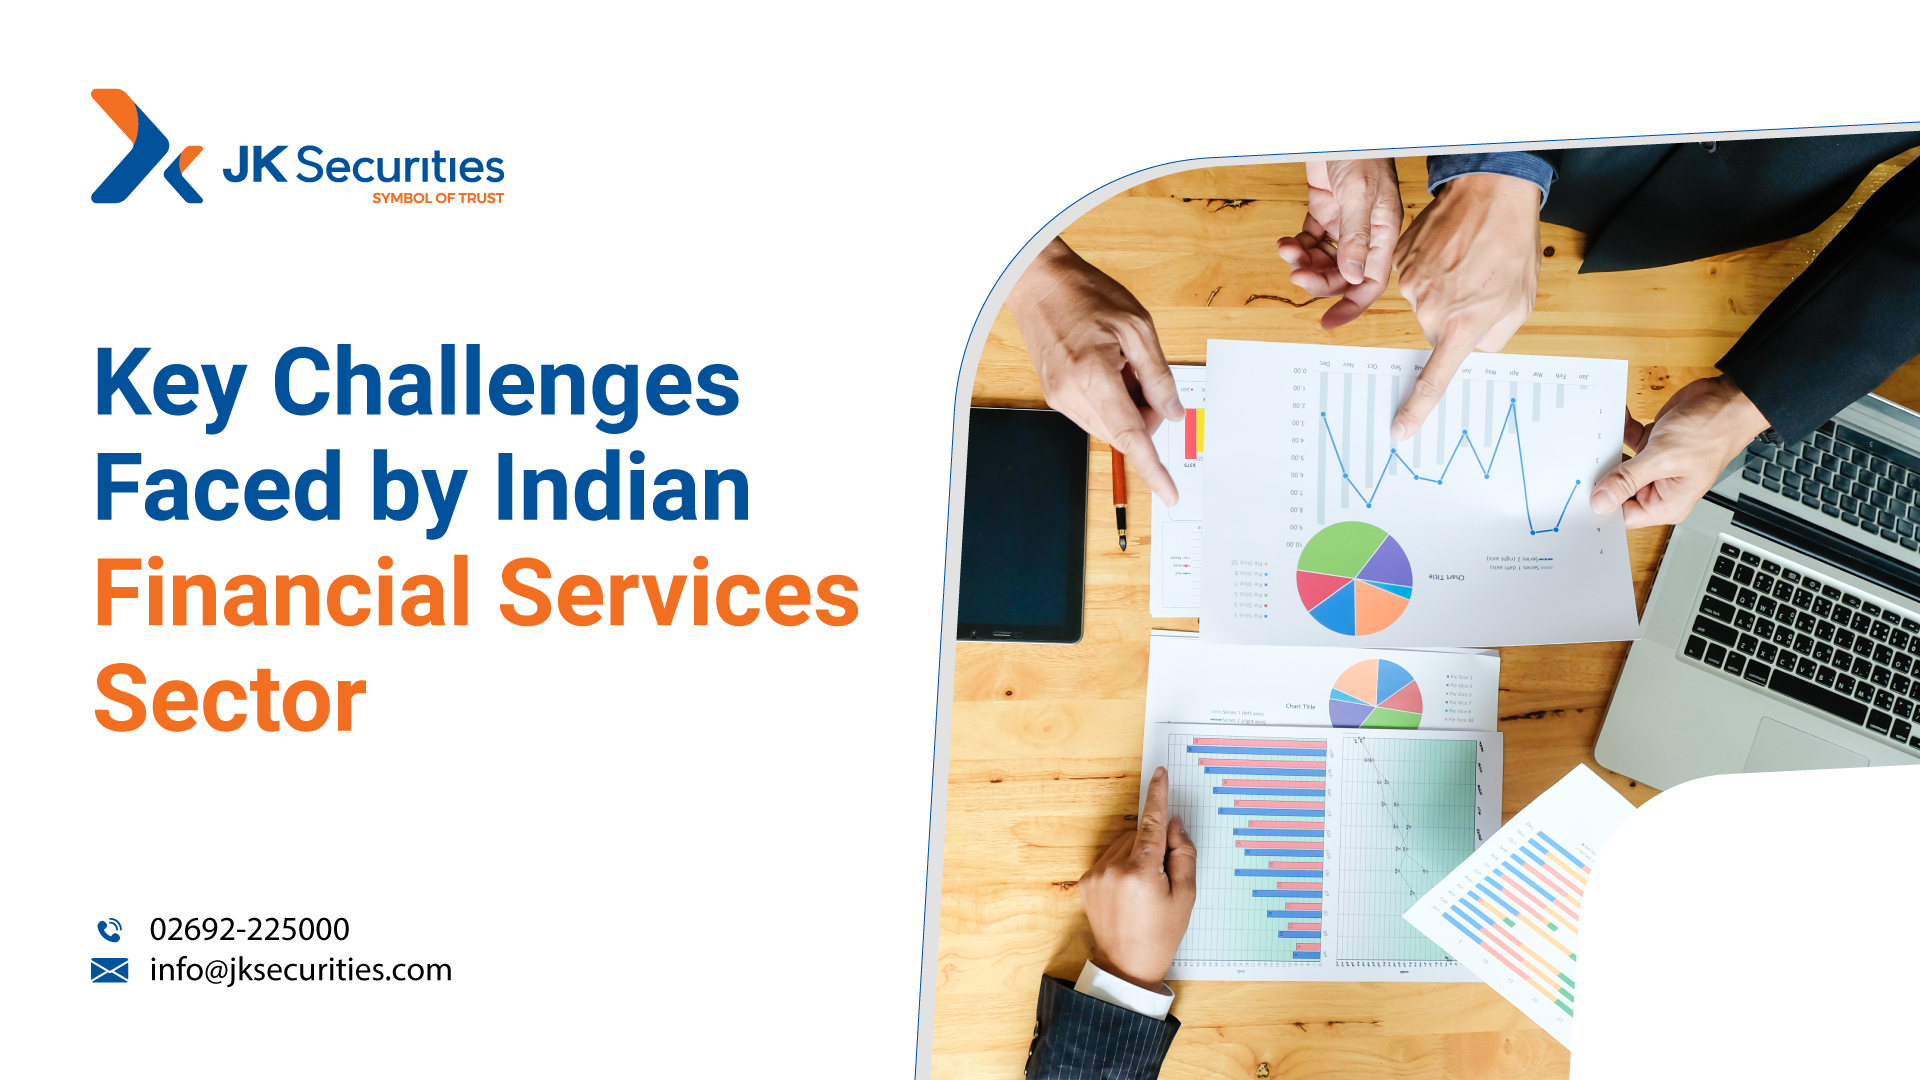 Key Challenges Faced by Indian Financial Services Sector in 2022